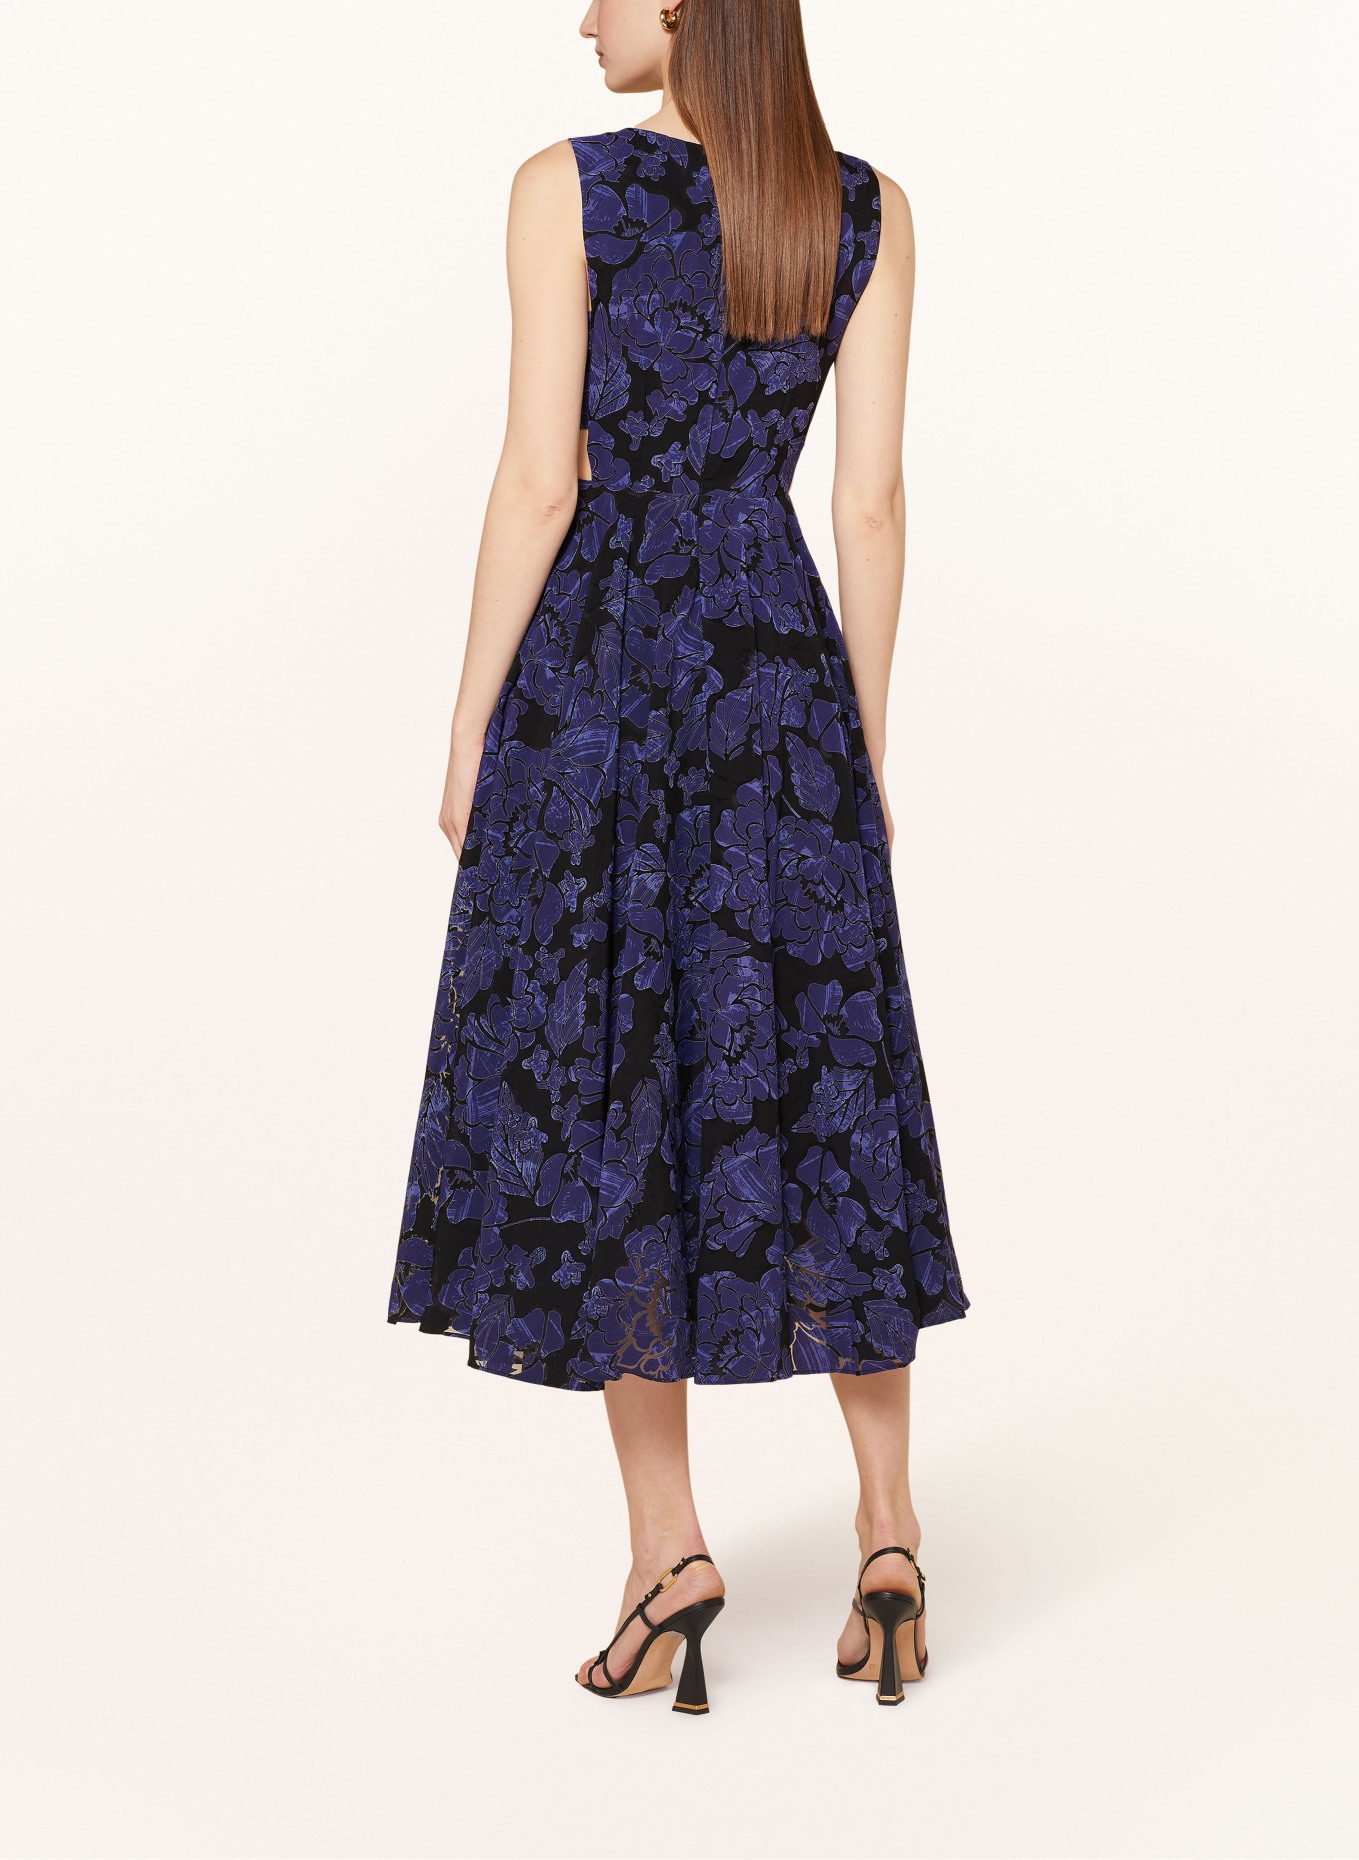 TED BAKER Dress OCCHITO with cut-out, Color: DARK BLUE/ BLACK (Image 3)